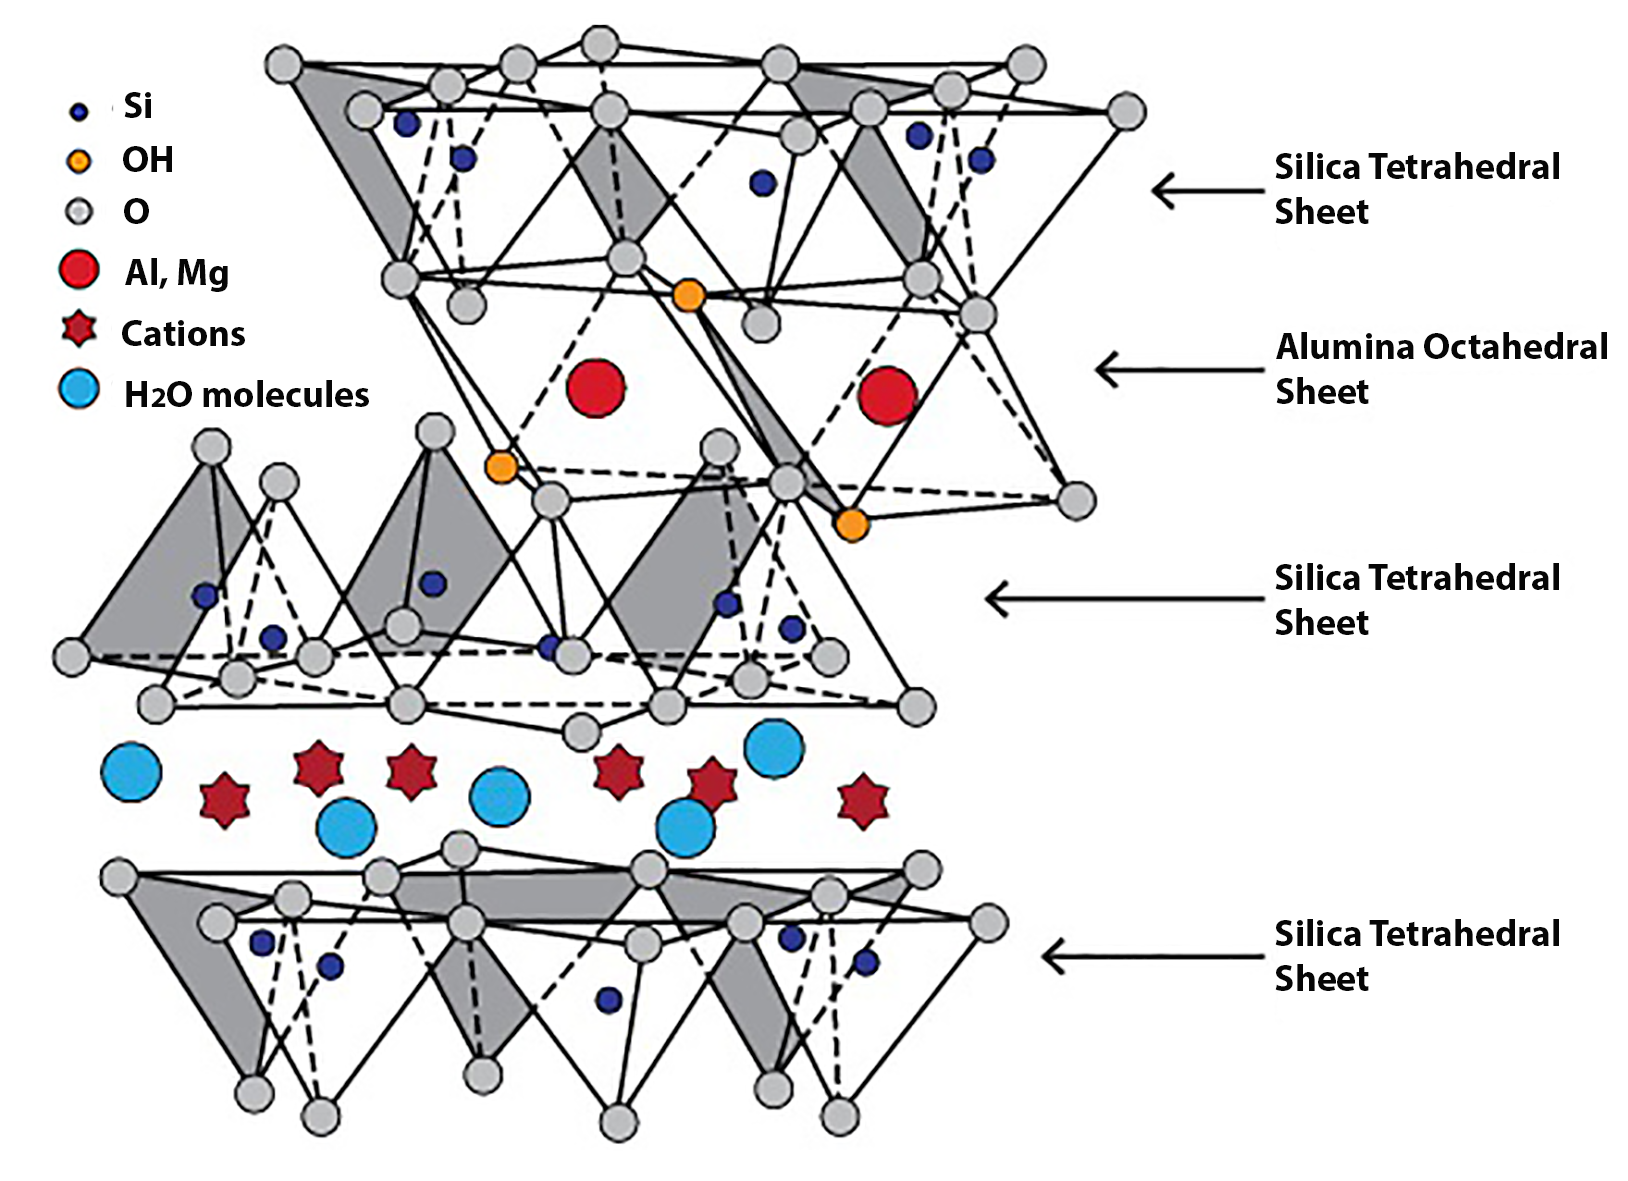 Typical structure of a clay mineral containing silicon, -OH groups, oxygen, aluminum, magnesium, cations and water molecules. The structure contains sheets of silica tetrahedrals and alumina octahedrals with cations and water molecules sandwiched in between.